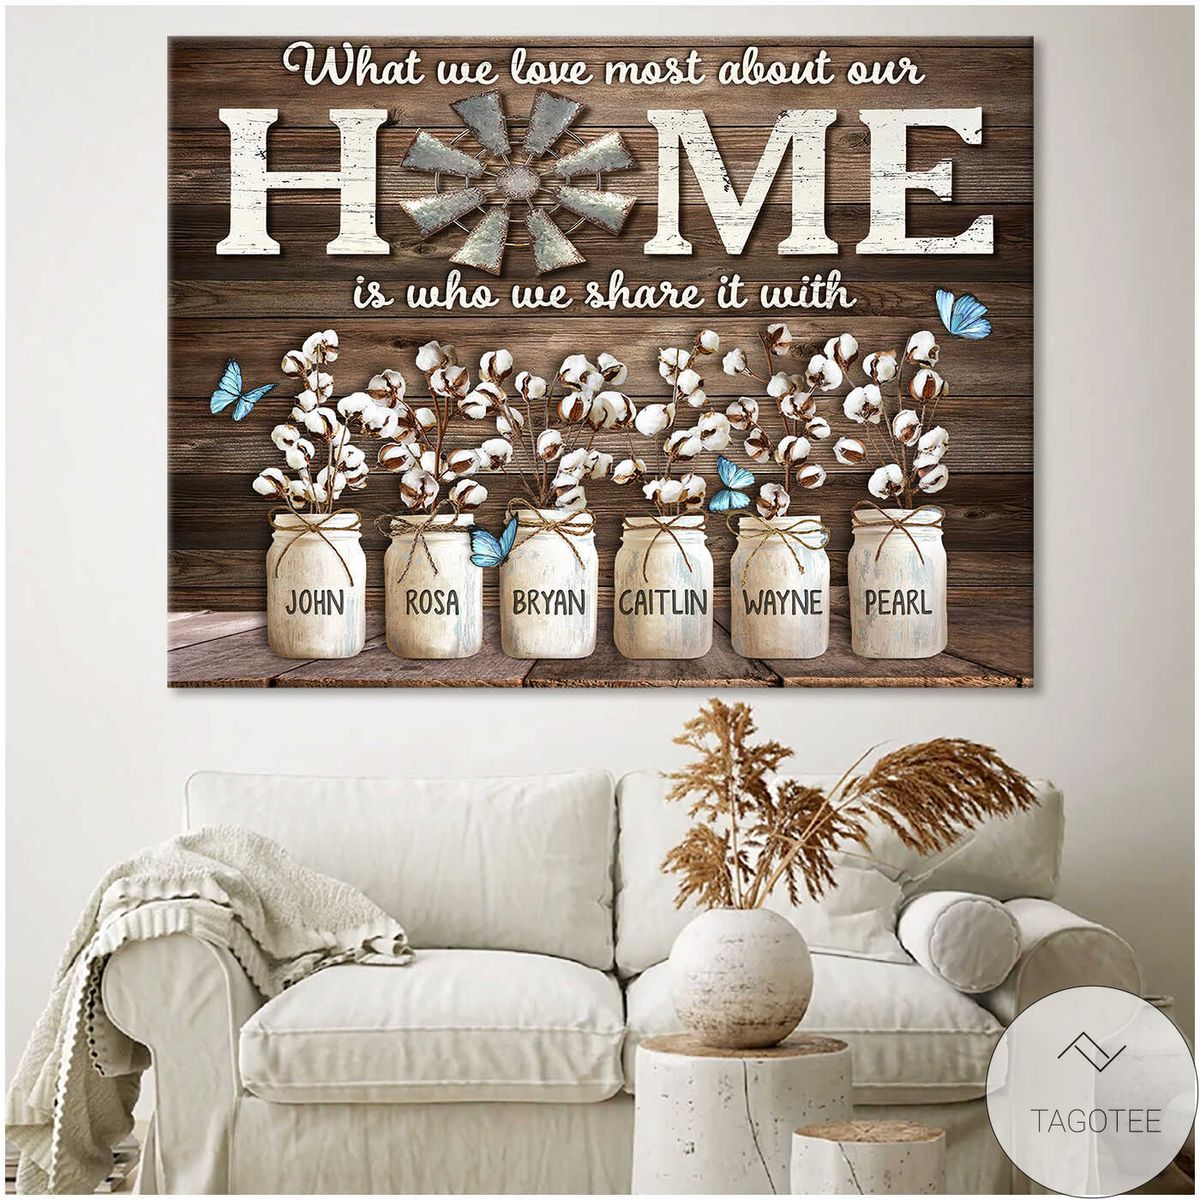 Personalized What We Love Most About Our Home Canvas